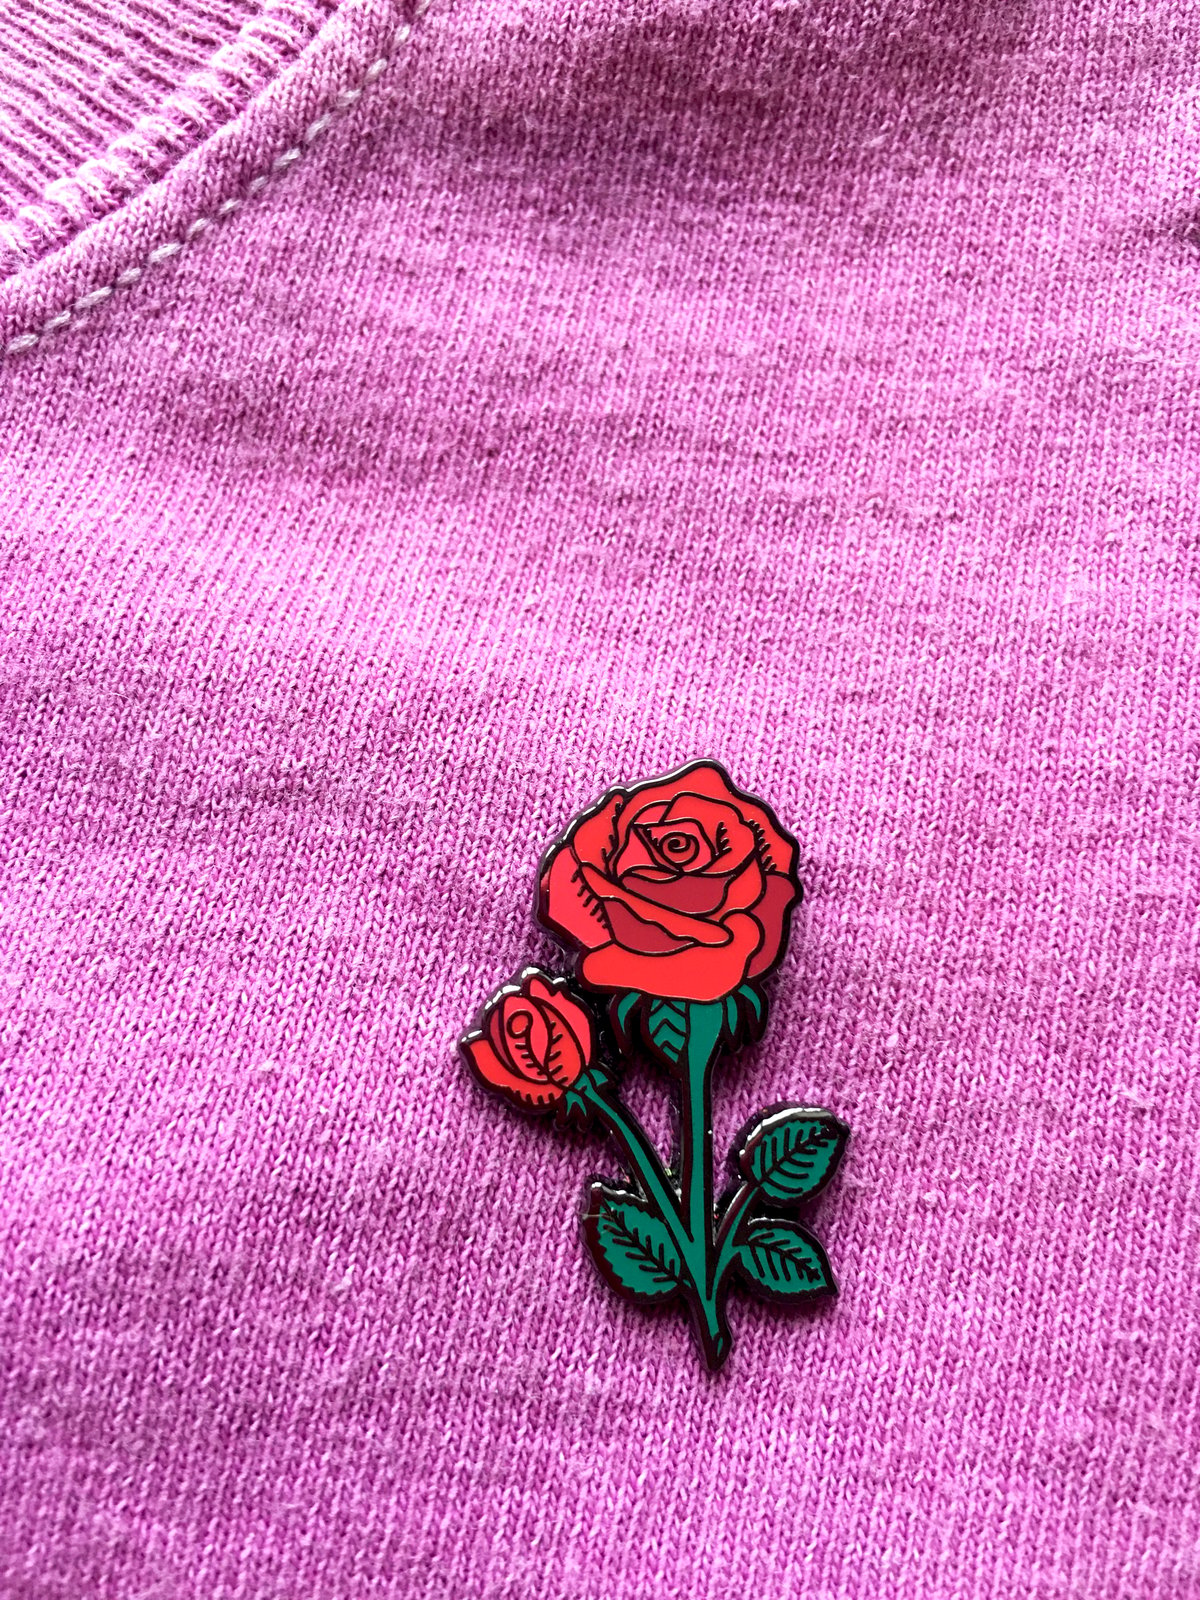 *NEW* Red Rose Pin with Green Stem 